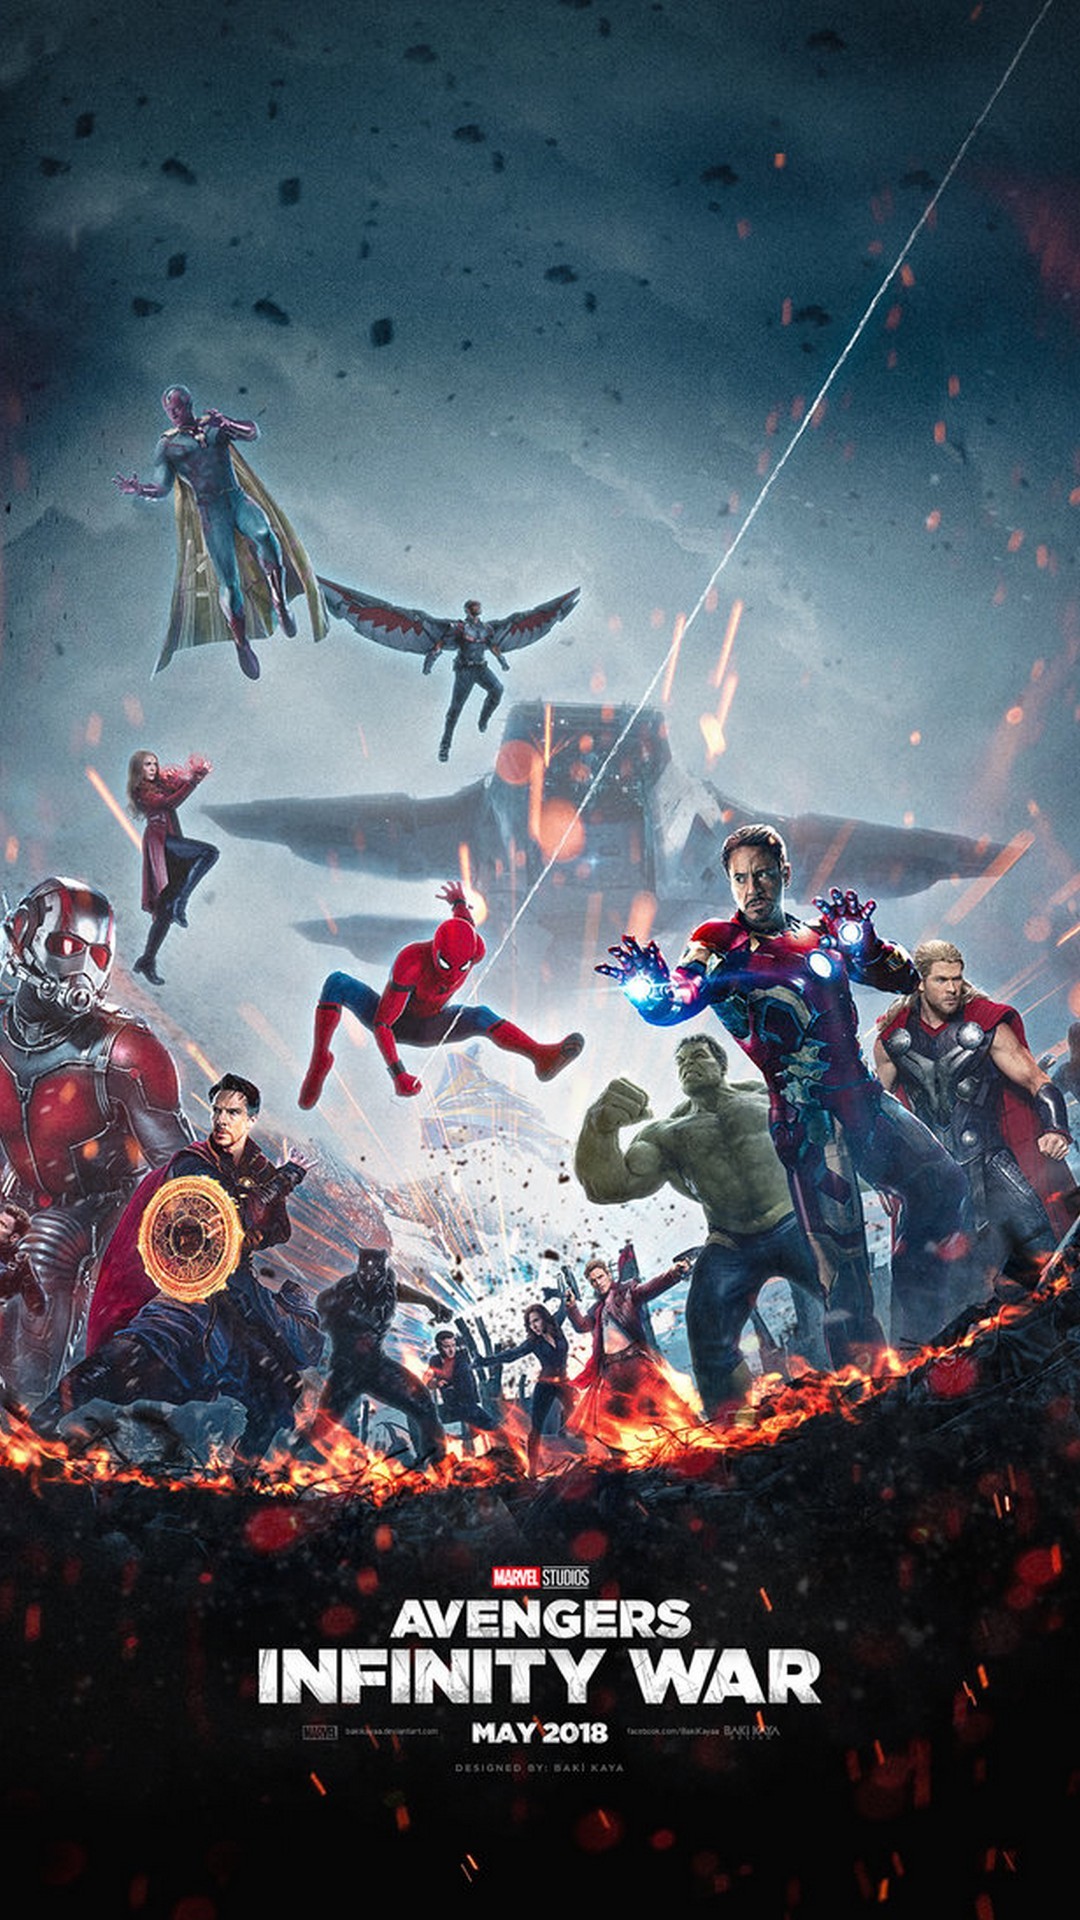 Marvel For Android Wallpapers